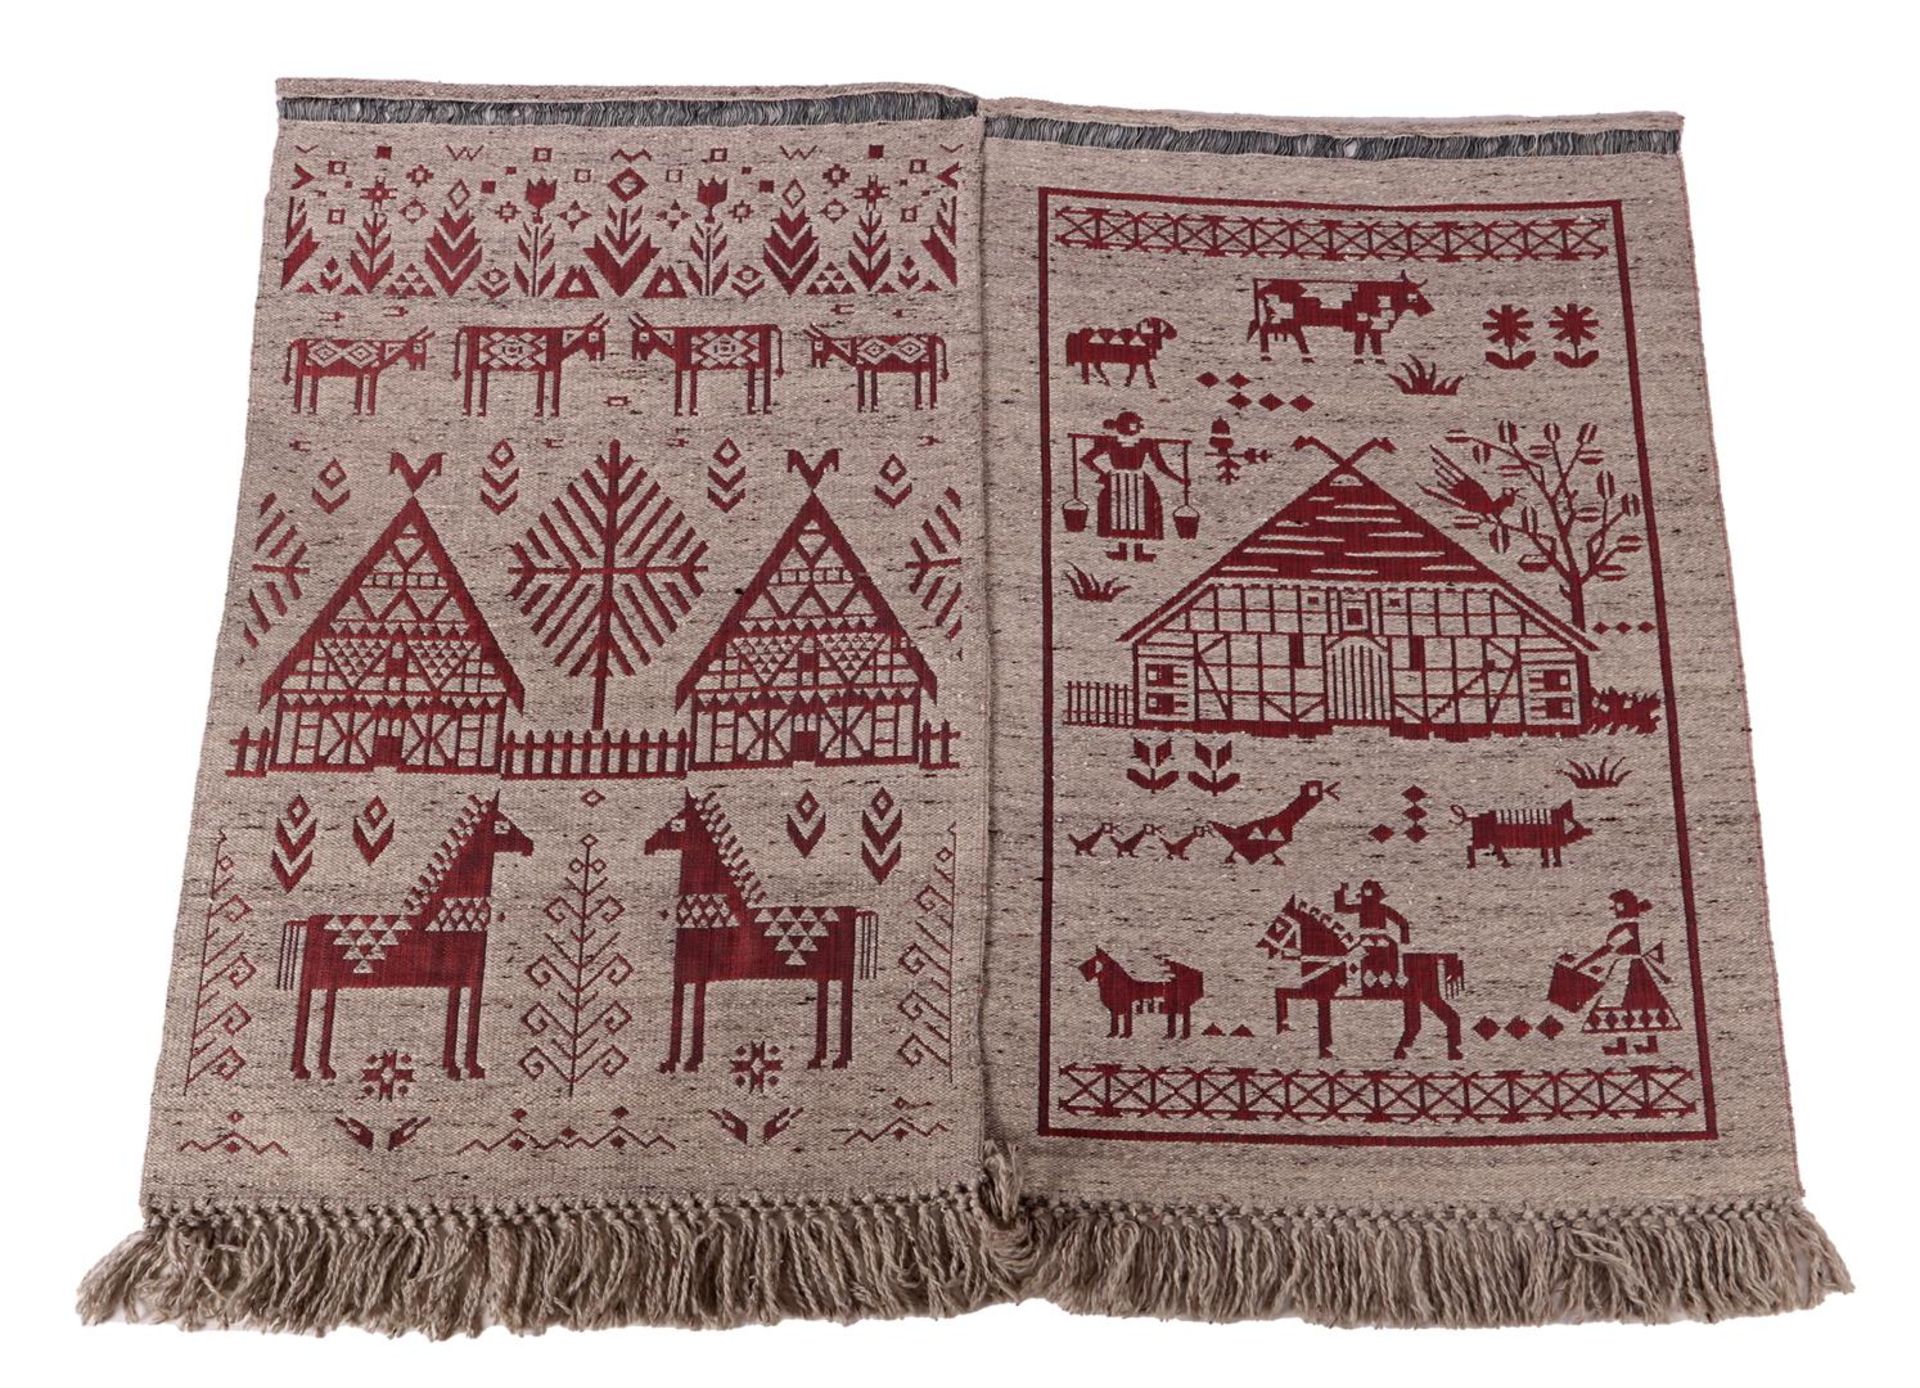 2 hand-knotted wool tapestries